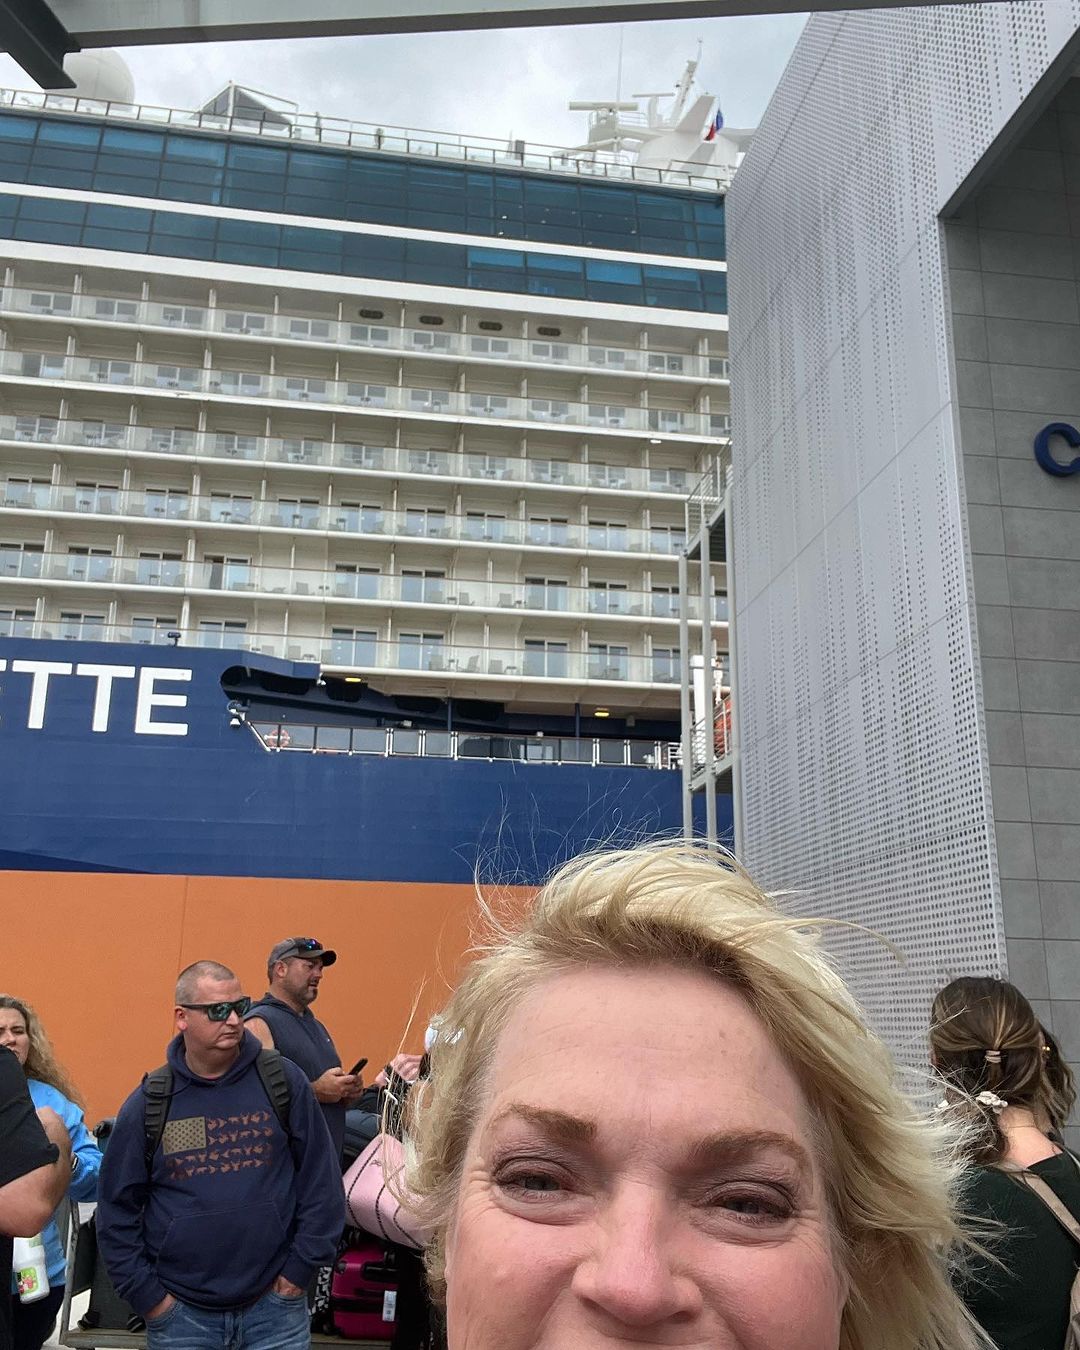 Sister Wives’ Janelle Defends MLM Business on Plexus Cruise In Touch